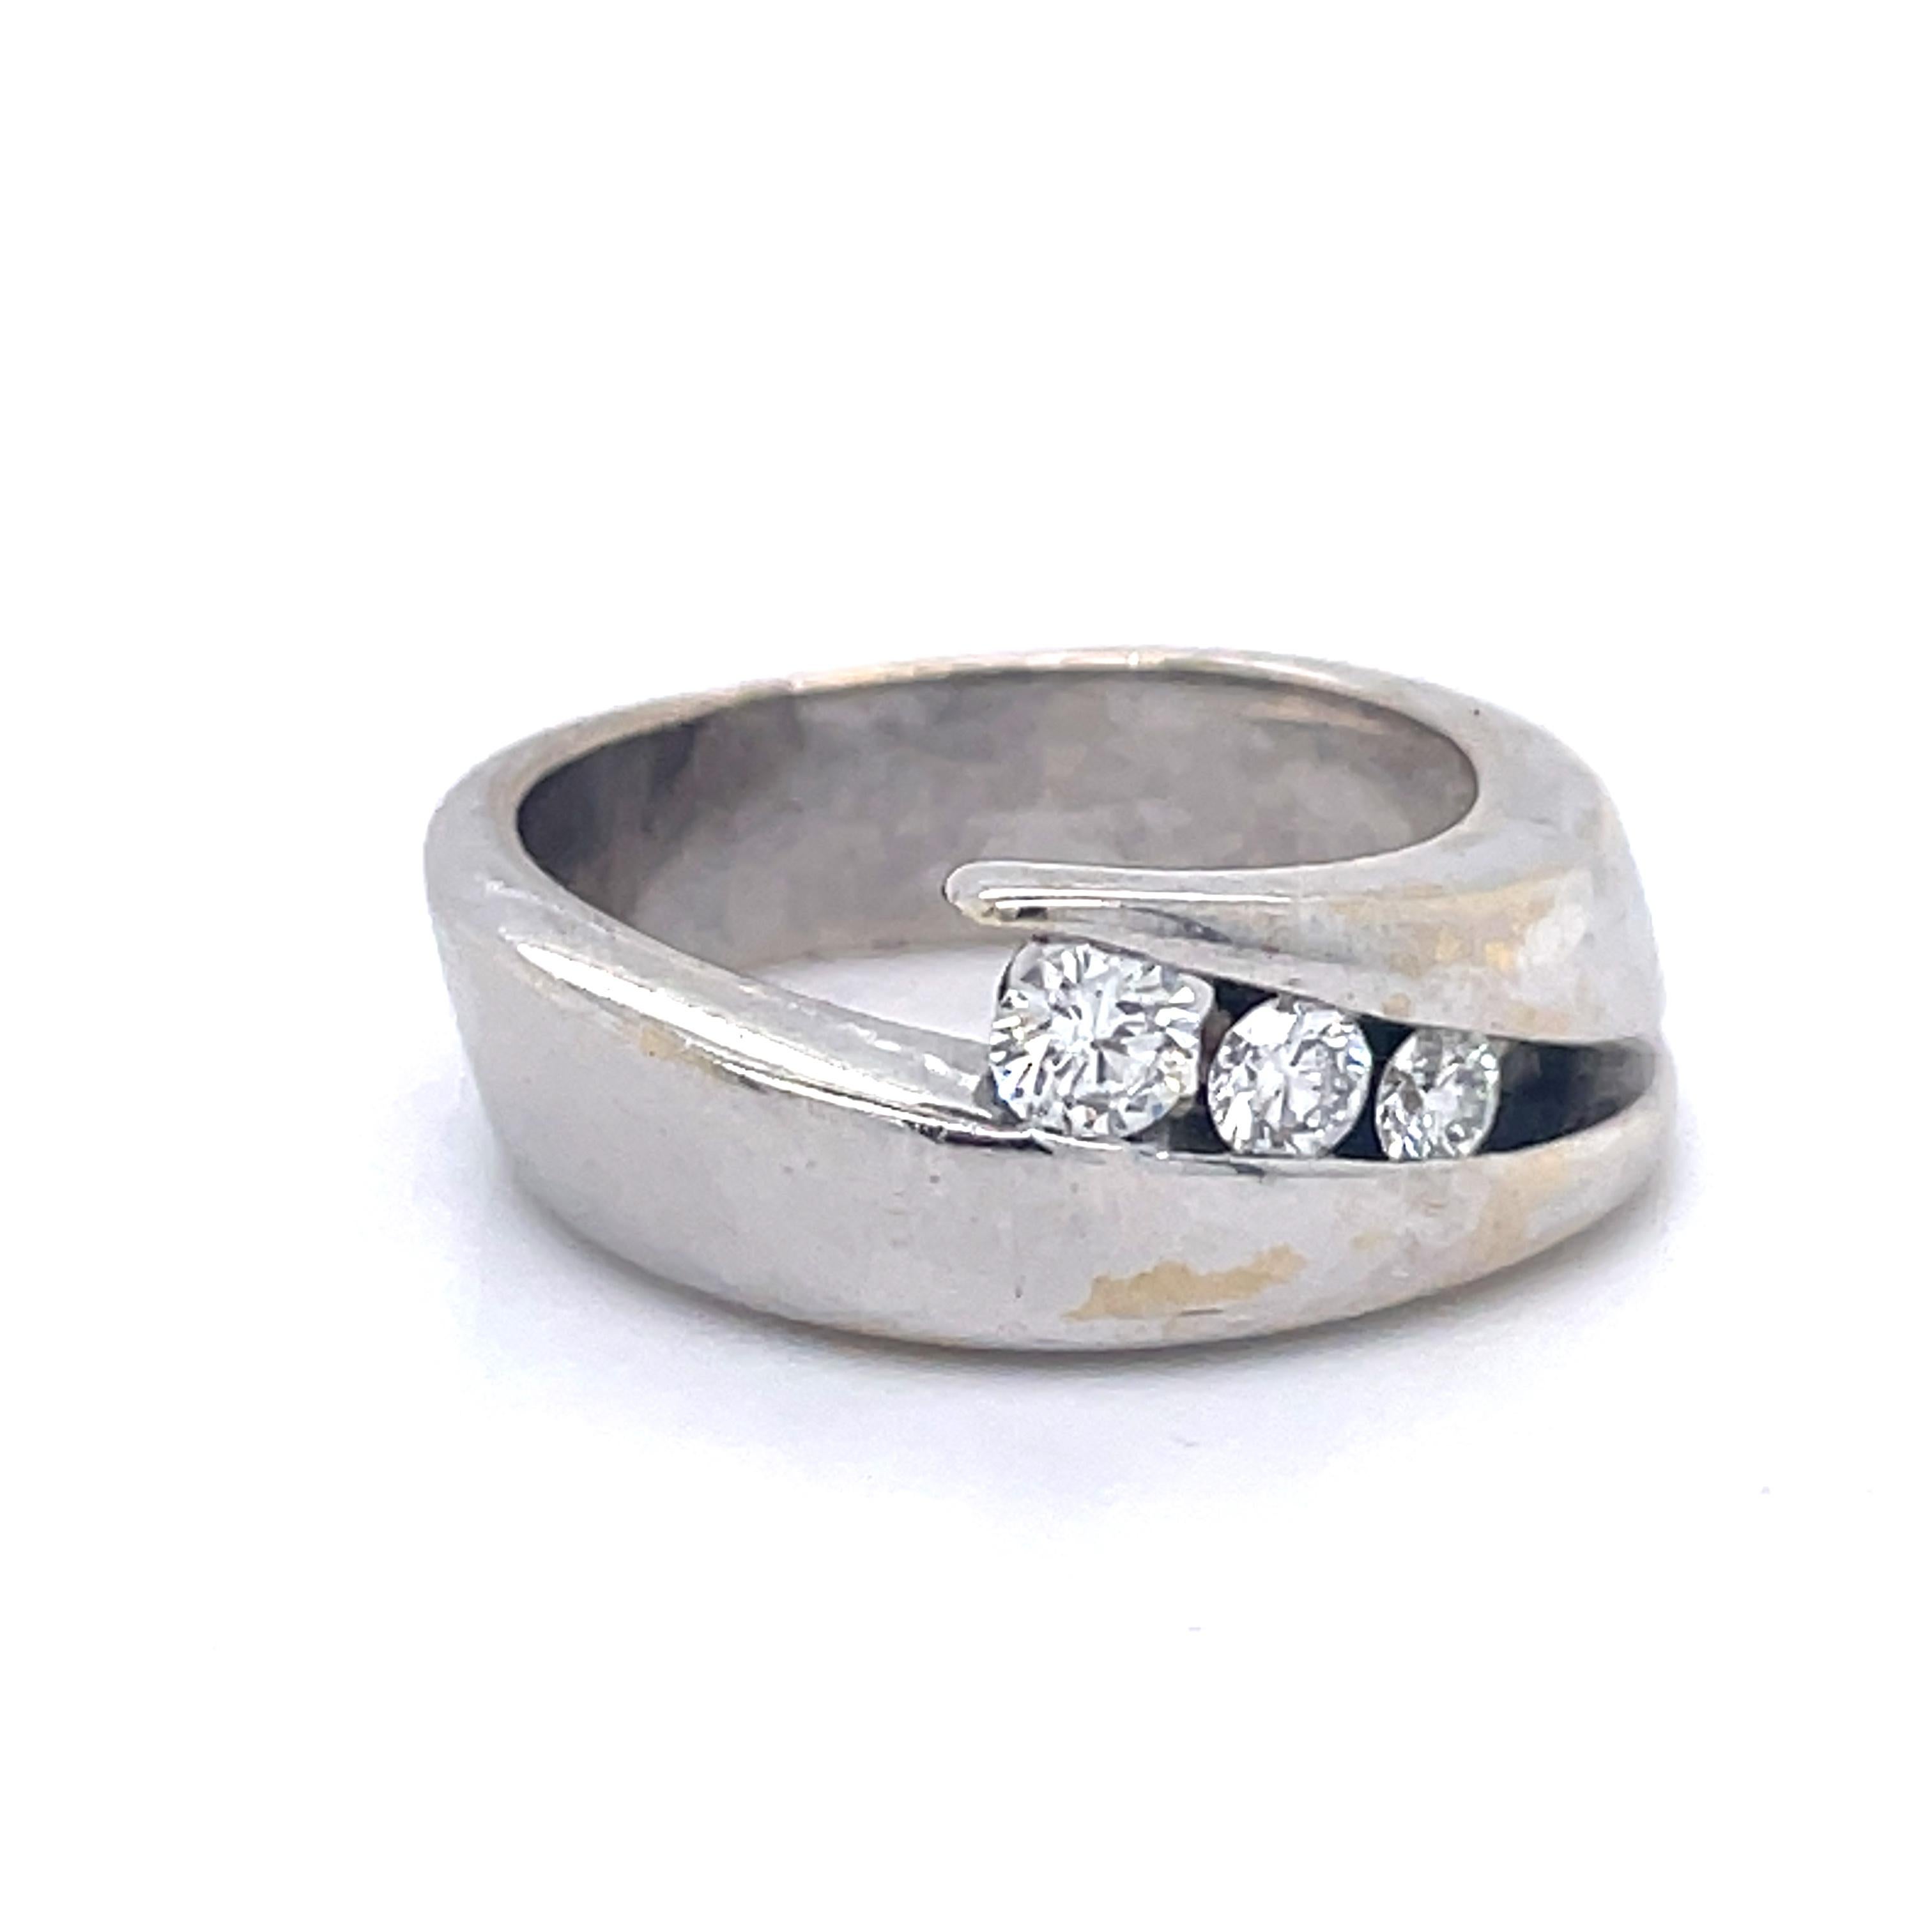 3 Diamonds Tention Ring -18K white gold, 0.3ct netural diamonds, vintage ring For Sale 1